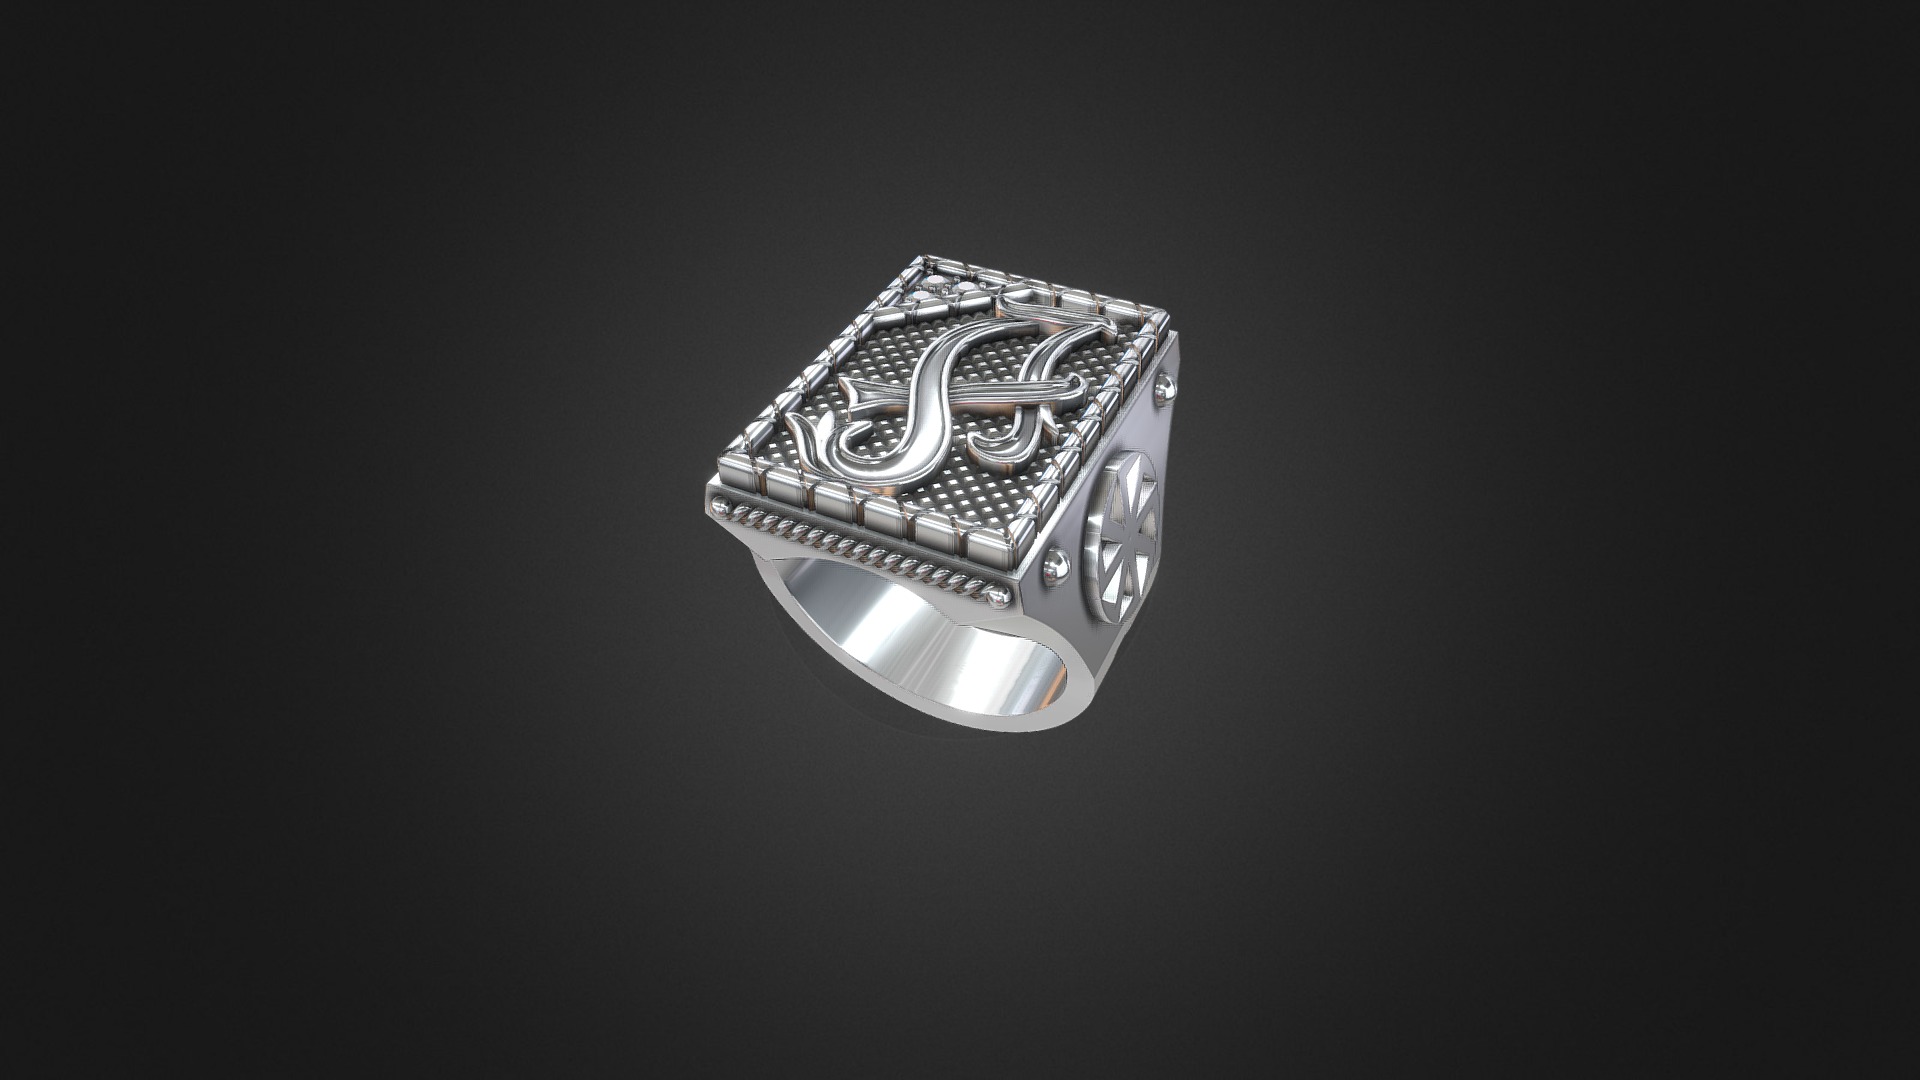 3D model 1058 – Ring - This is a 3D model of the 1058 - Ring. The 3D model is about a silver ring with diamonds.